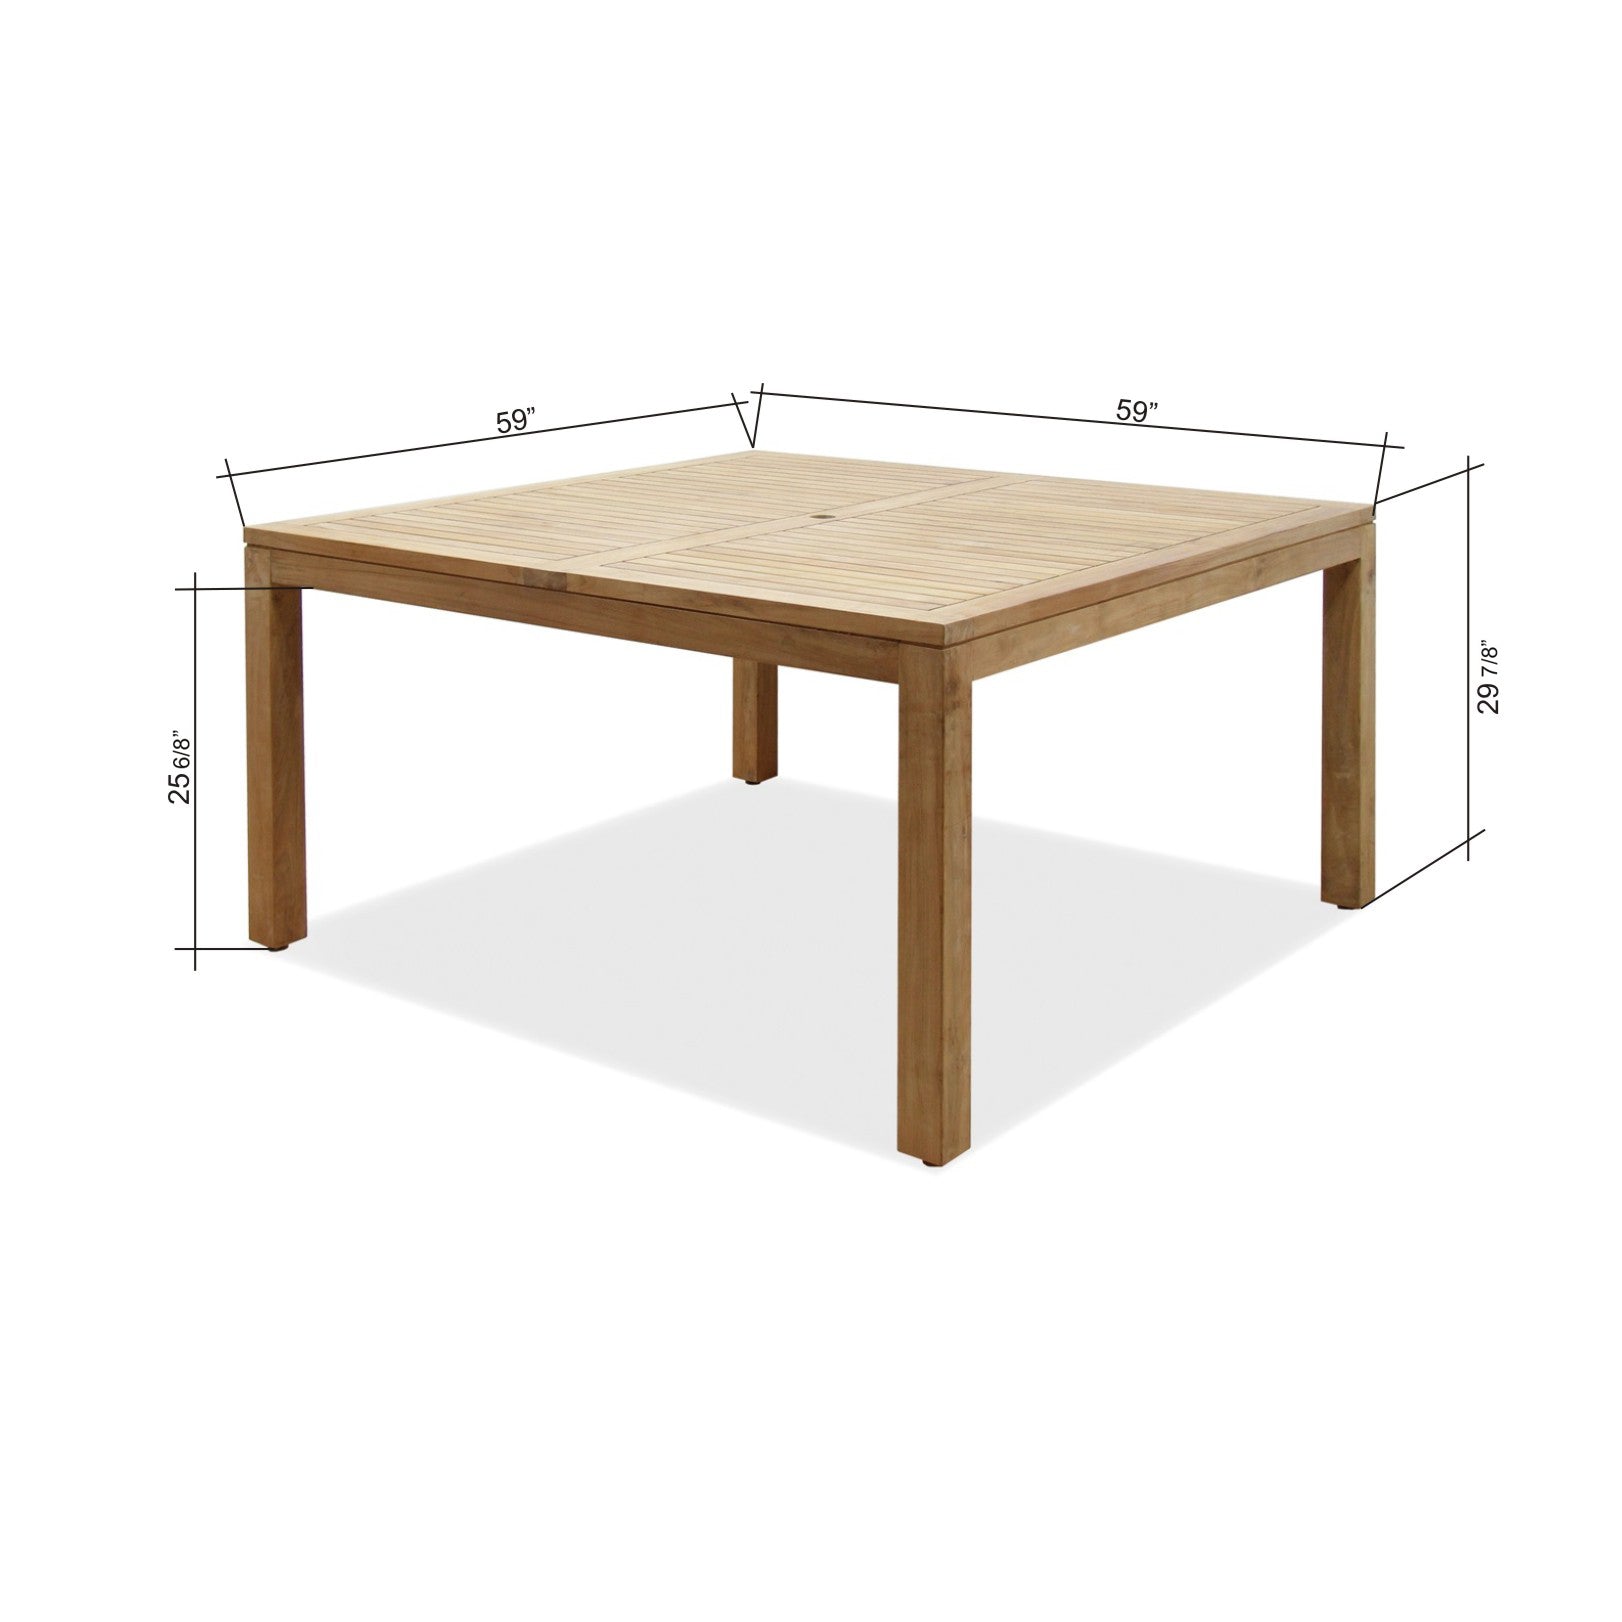 Rinjani Square Outdoor Dining Table